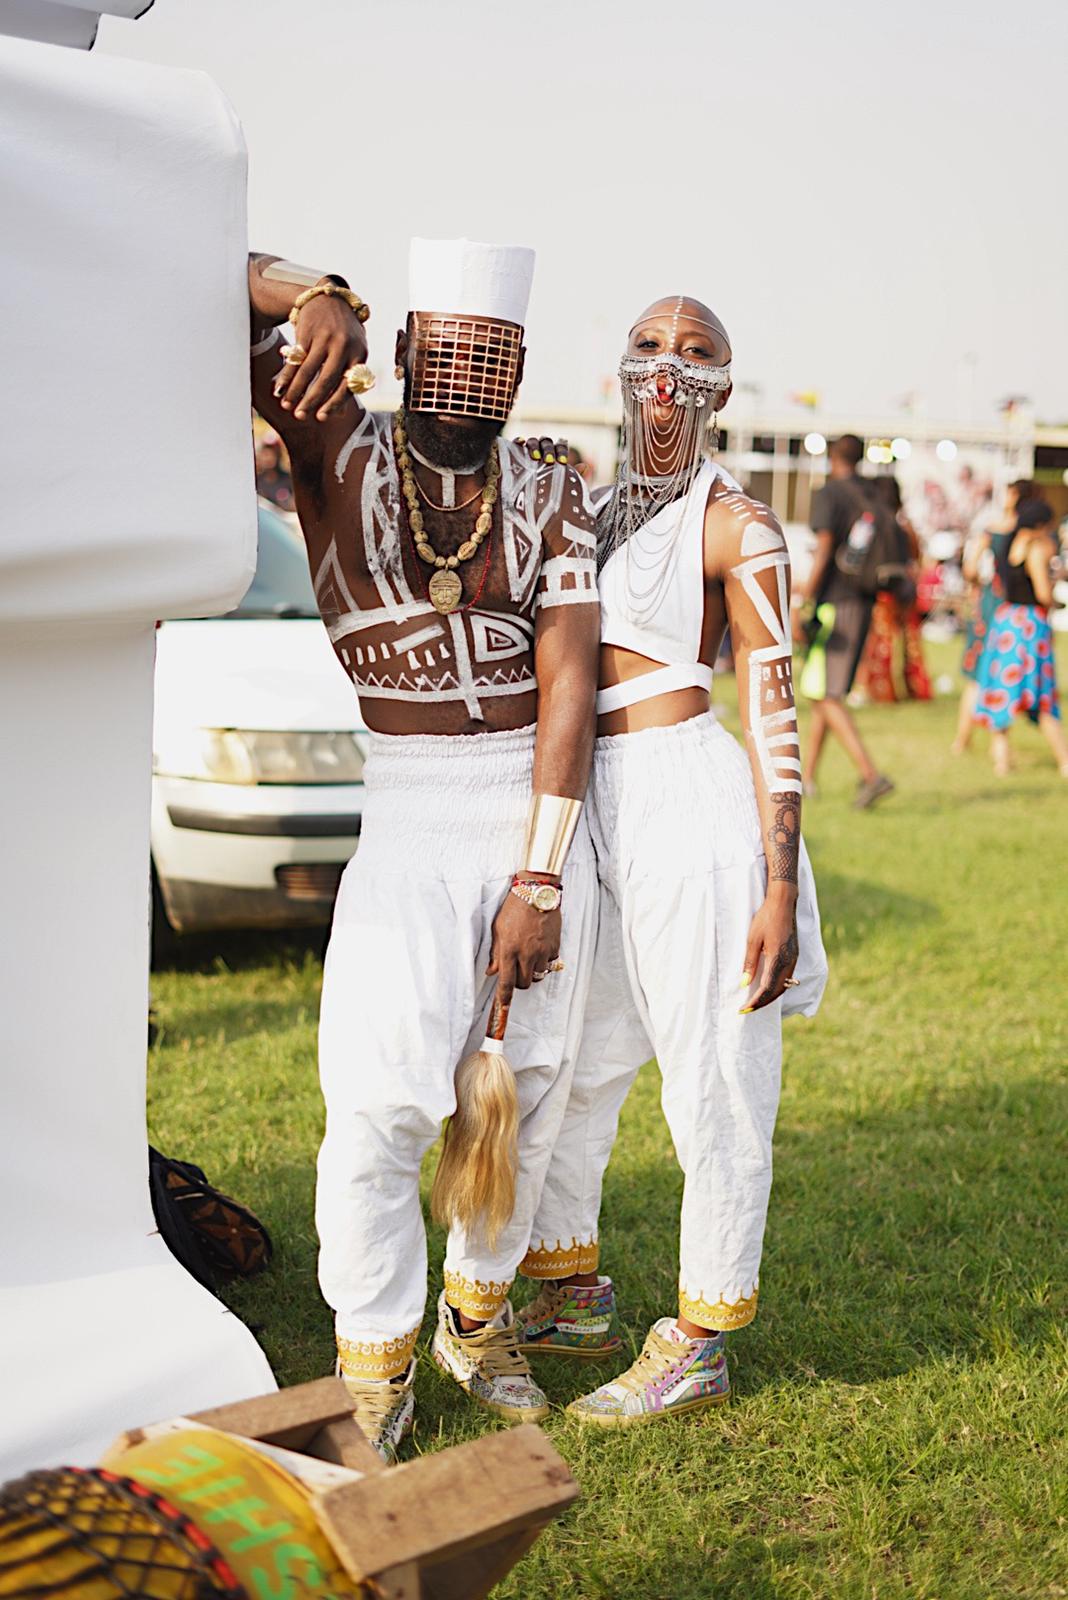 The Best Fashion Moments From Afrochella 2019